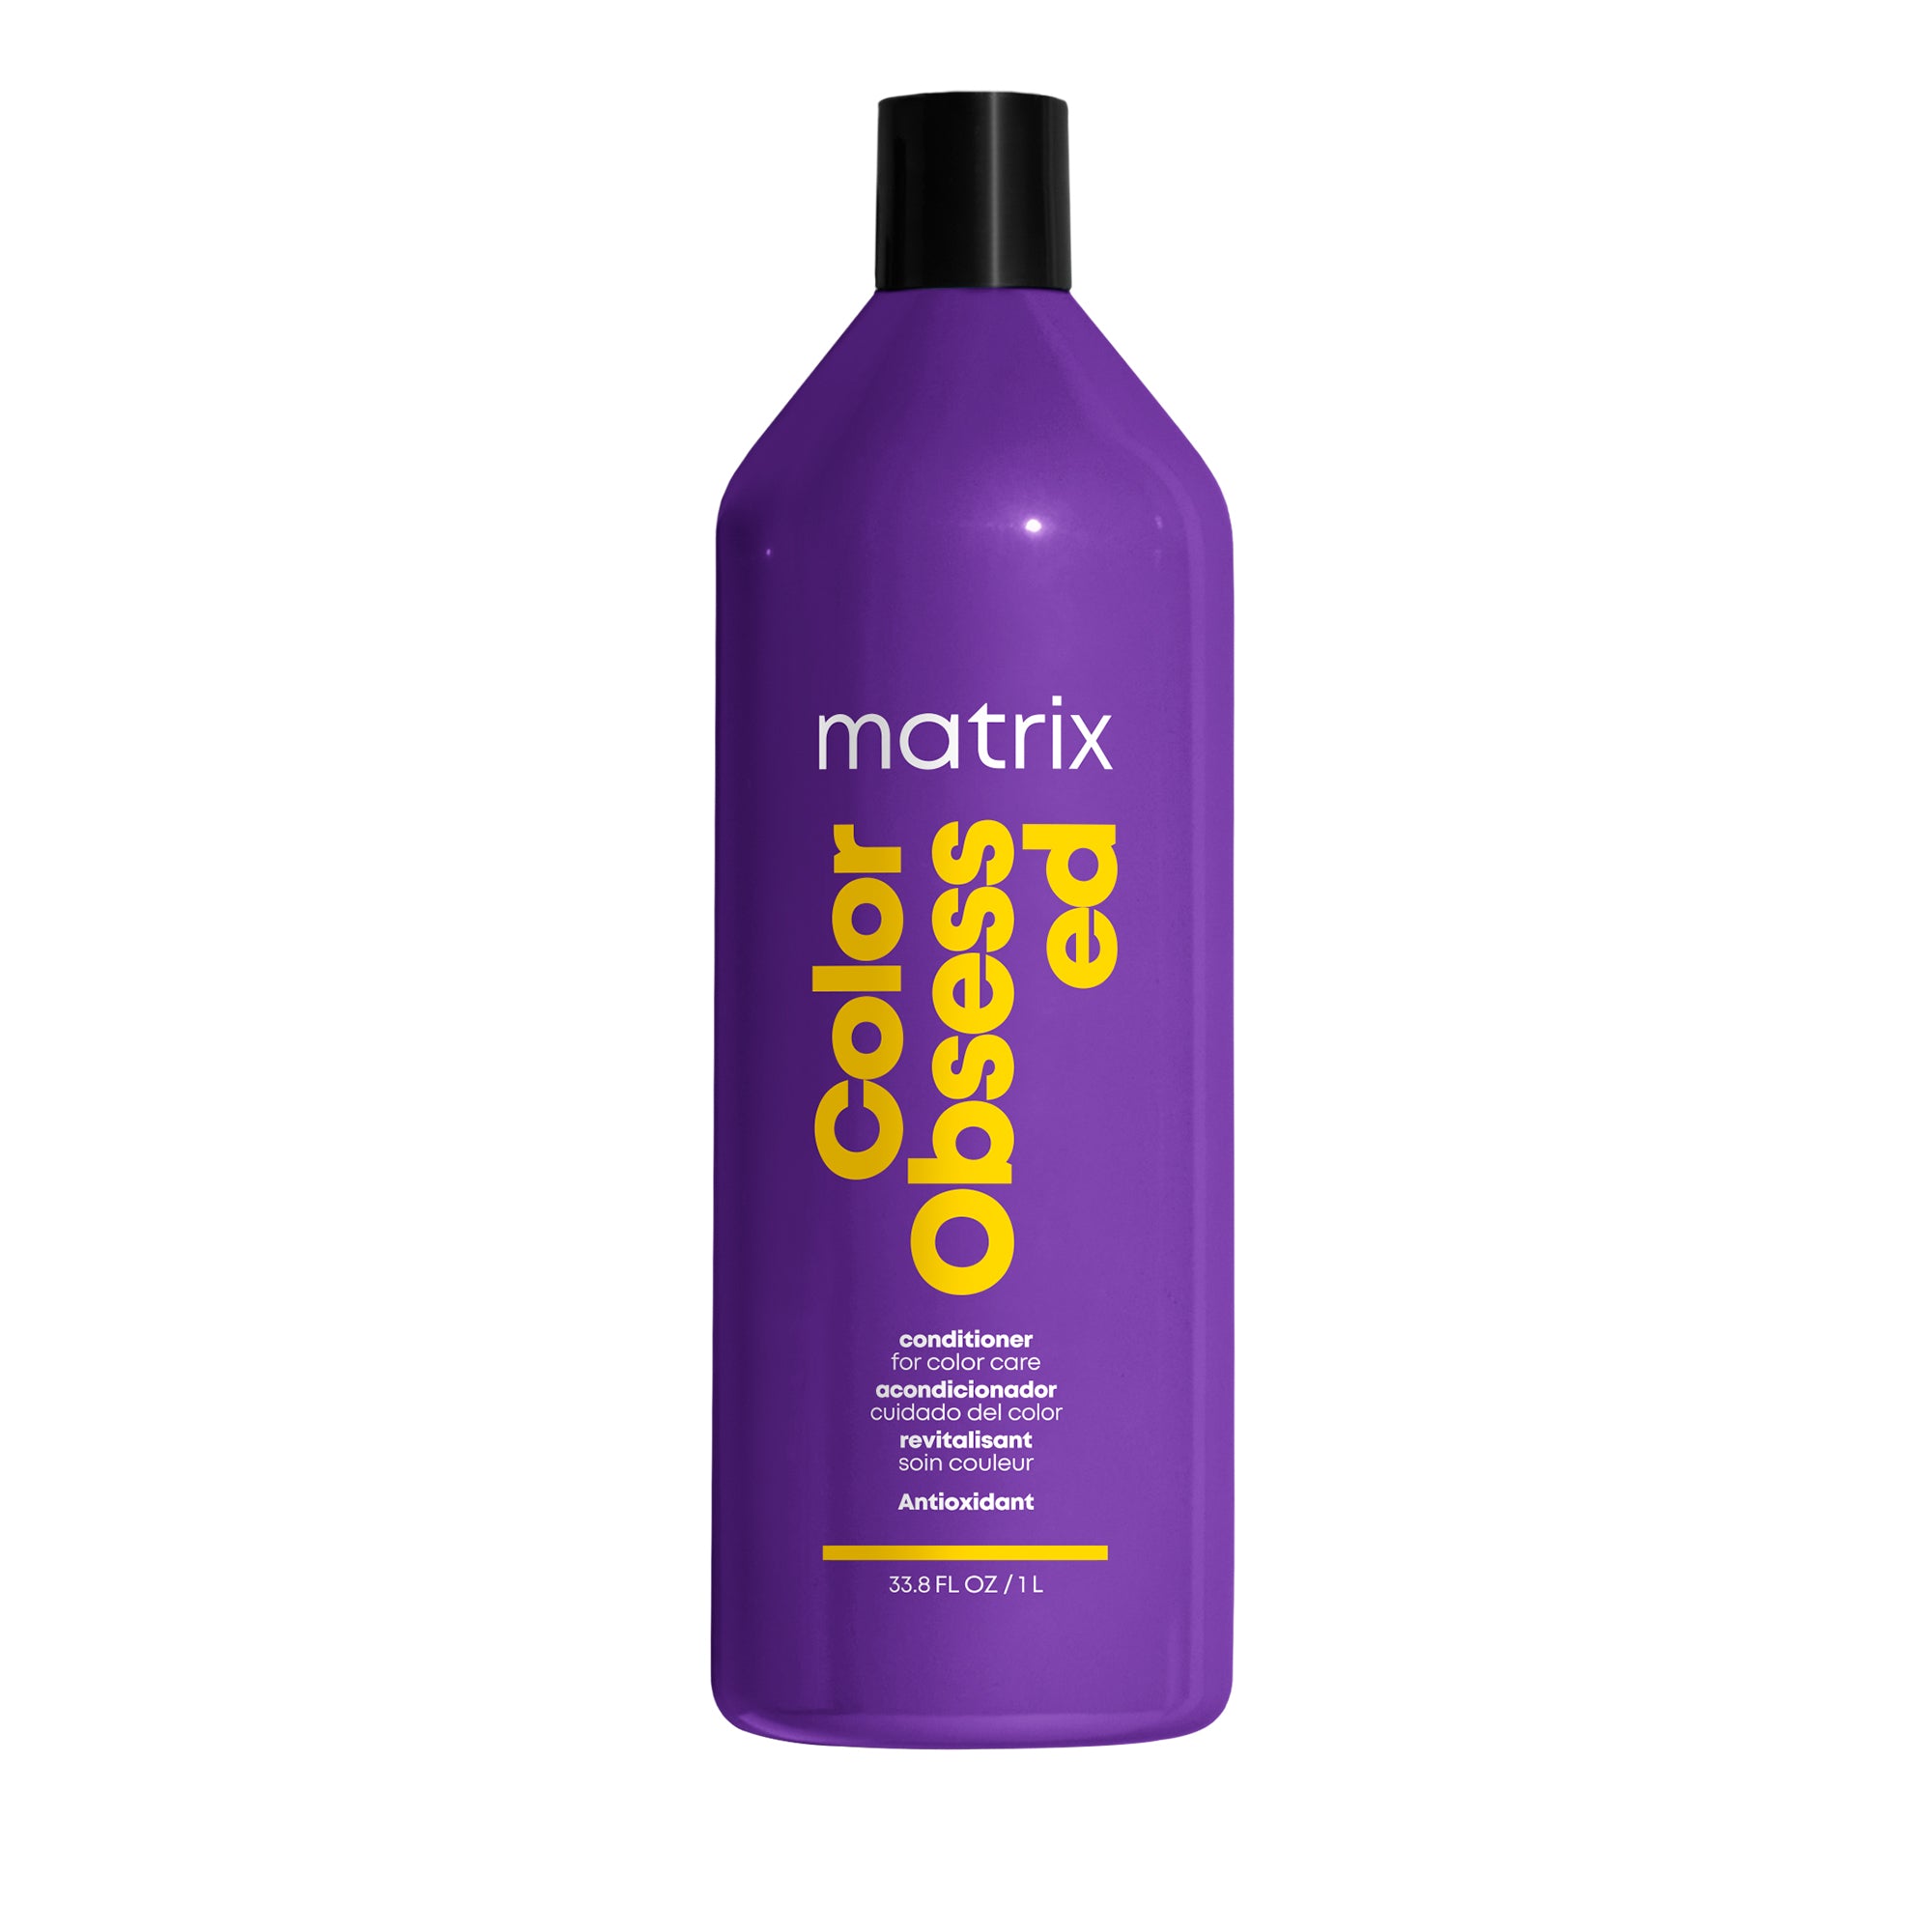 Matrix Color Obsessed Shampoo and Conditioner Duo ($72 Value) / DUO